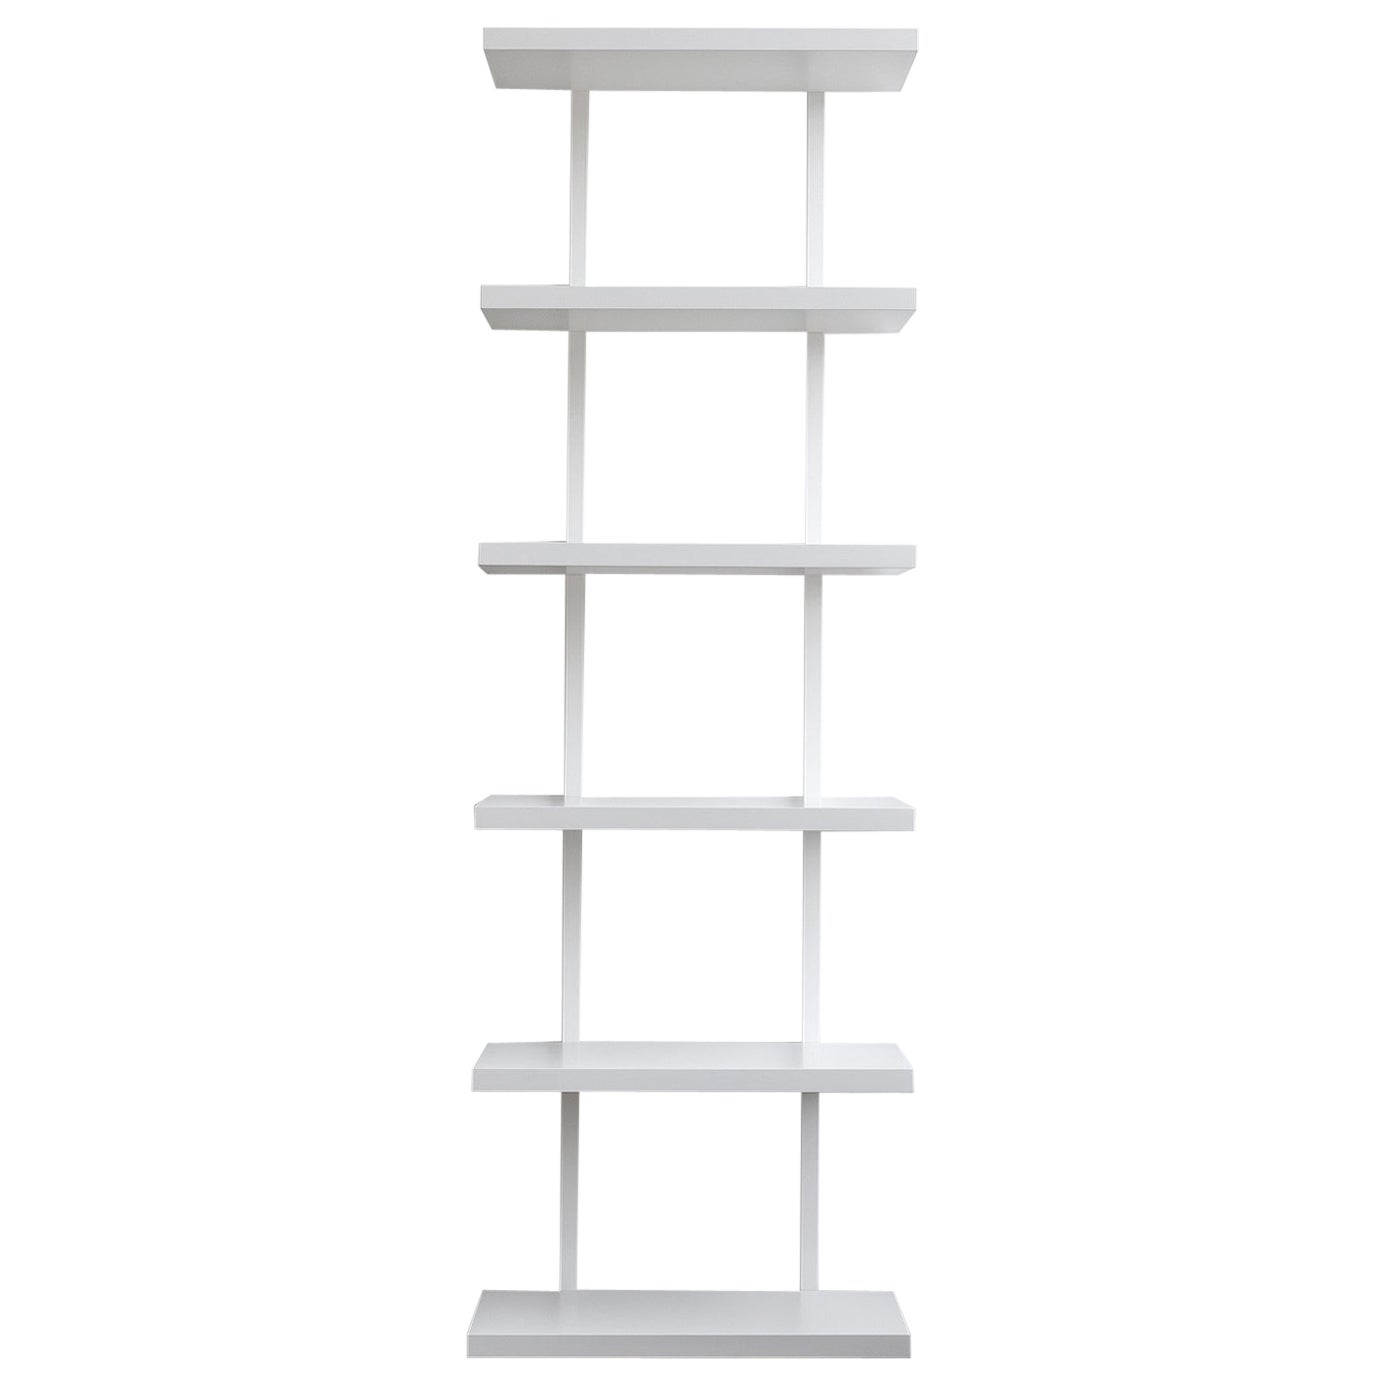 AS6 wall unit 24" wide shelves in white lacquer and powder coated steel